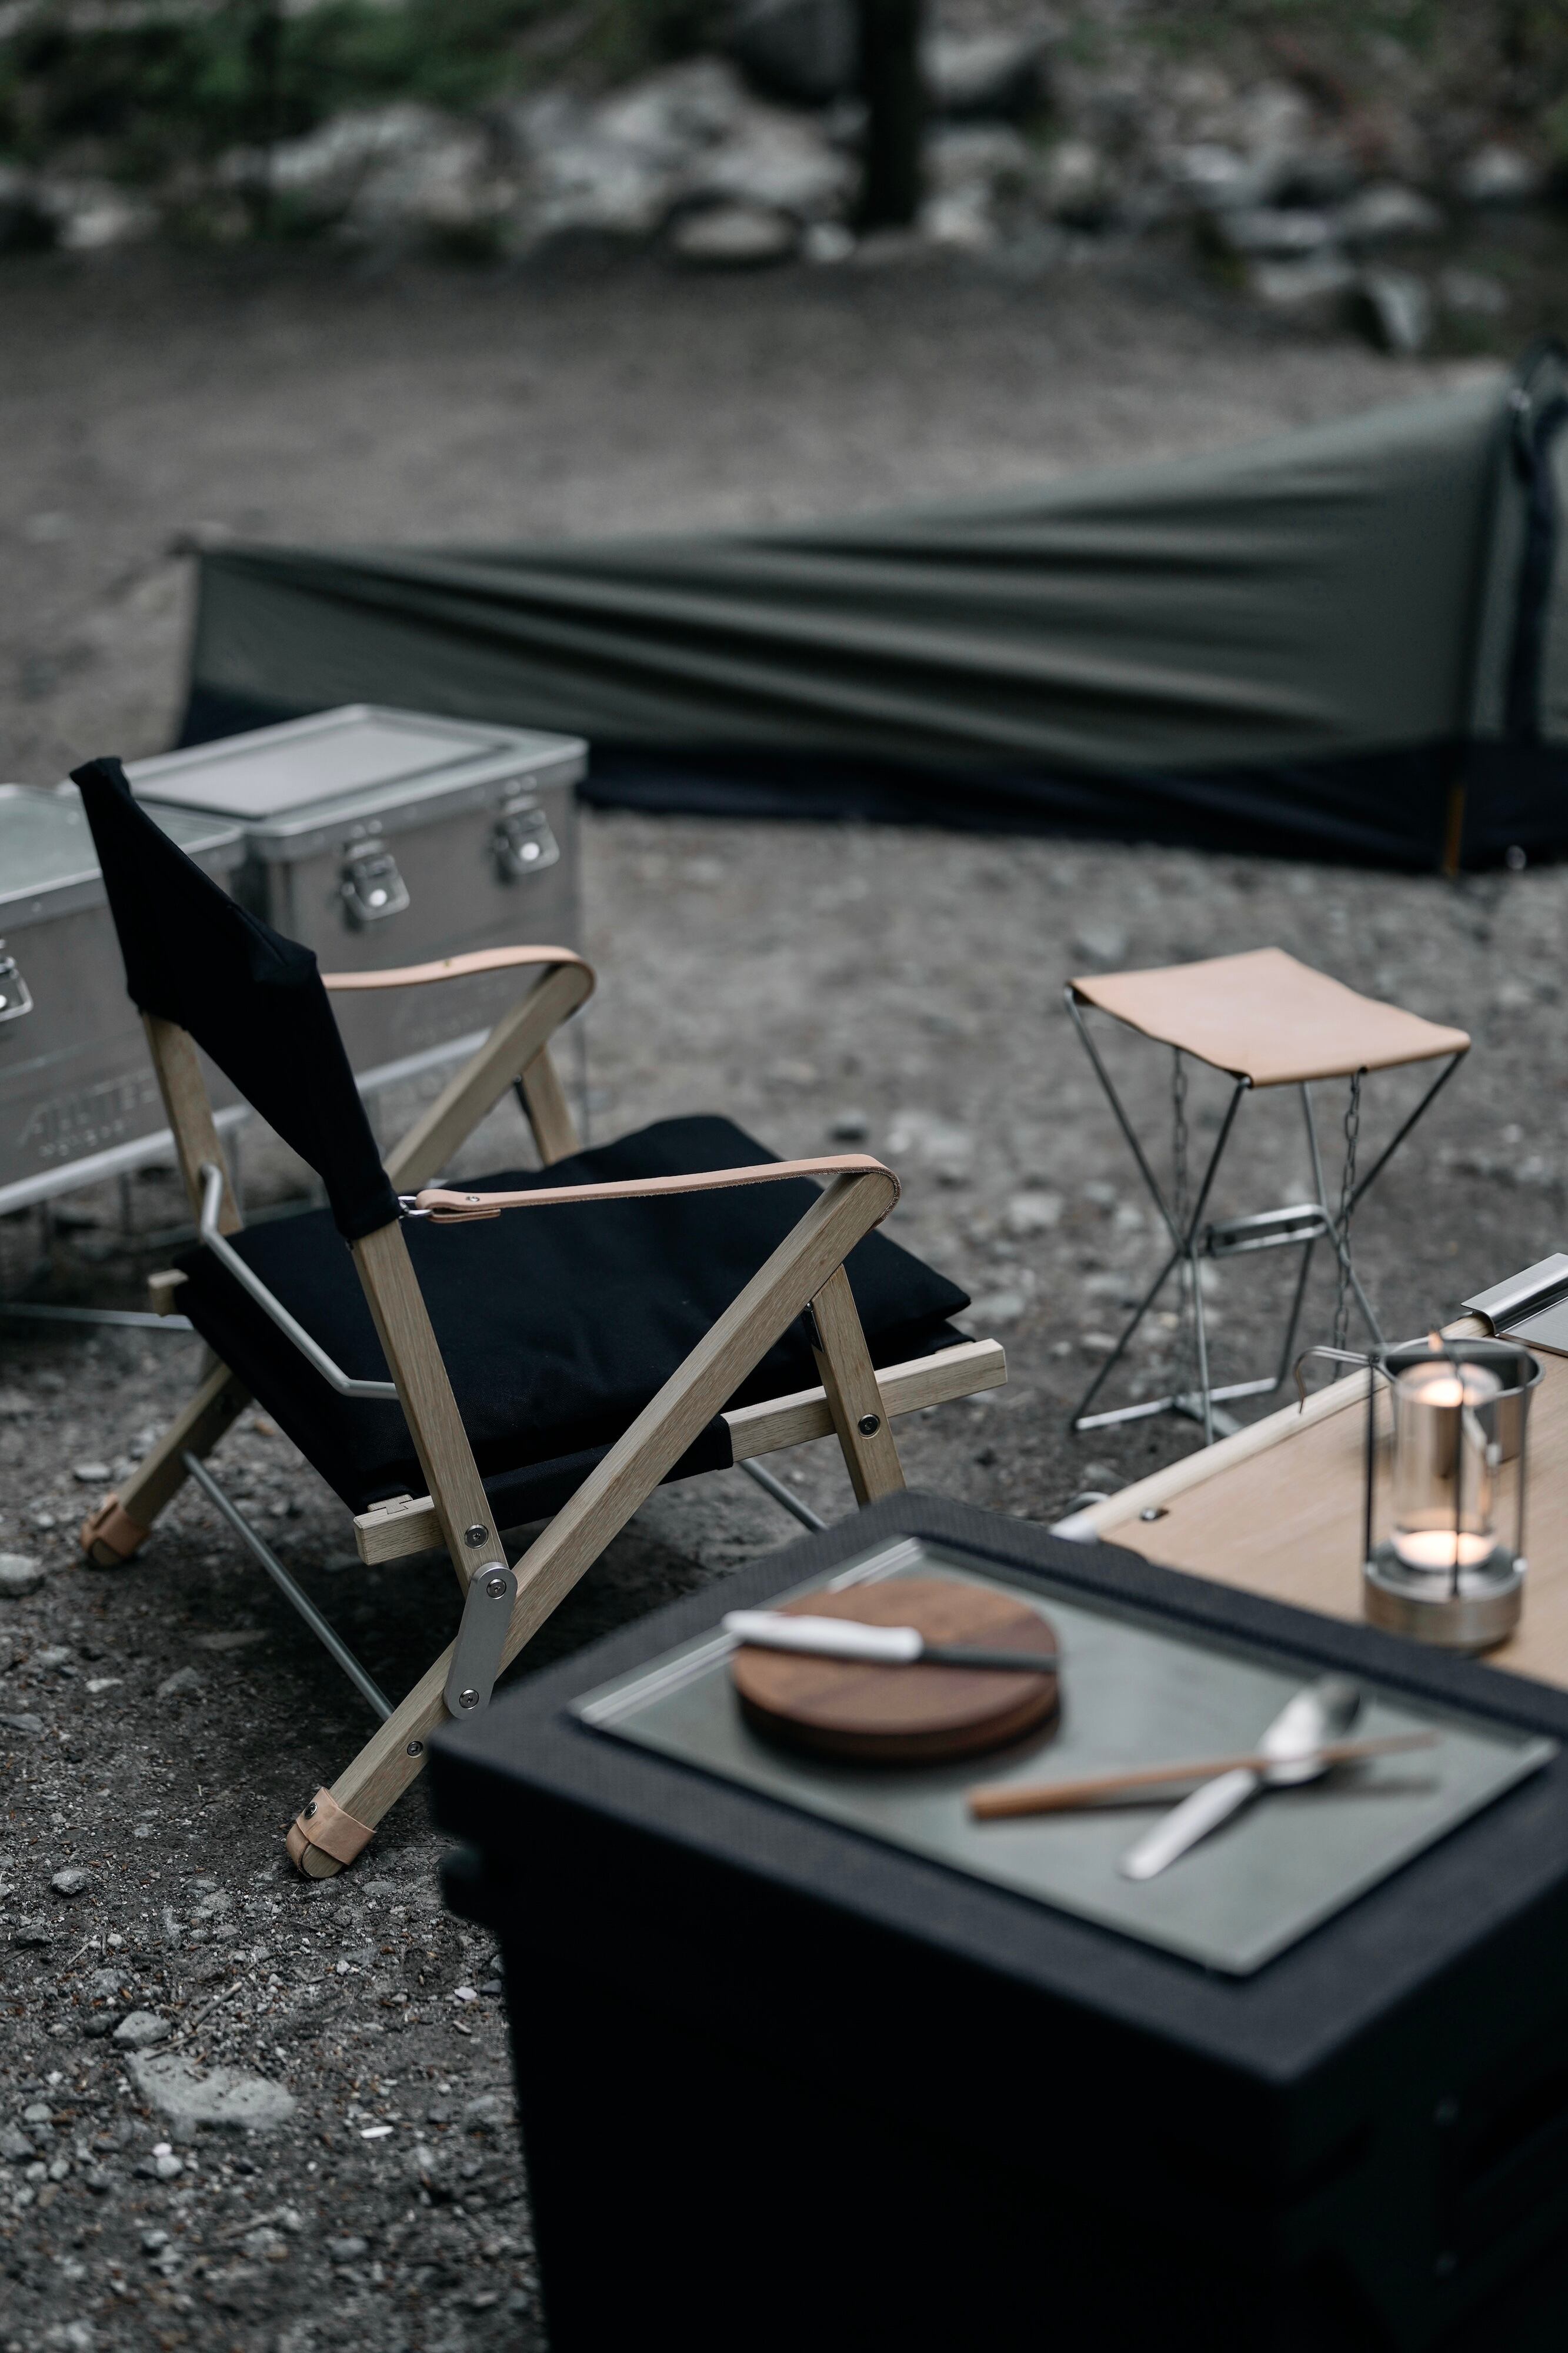 wanderout / UNIVERSAL STOOL NUME | wanderout lottery product